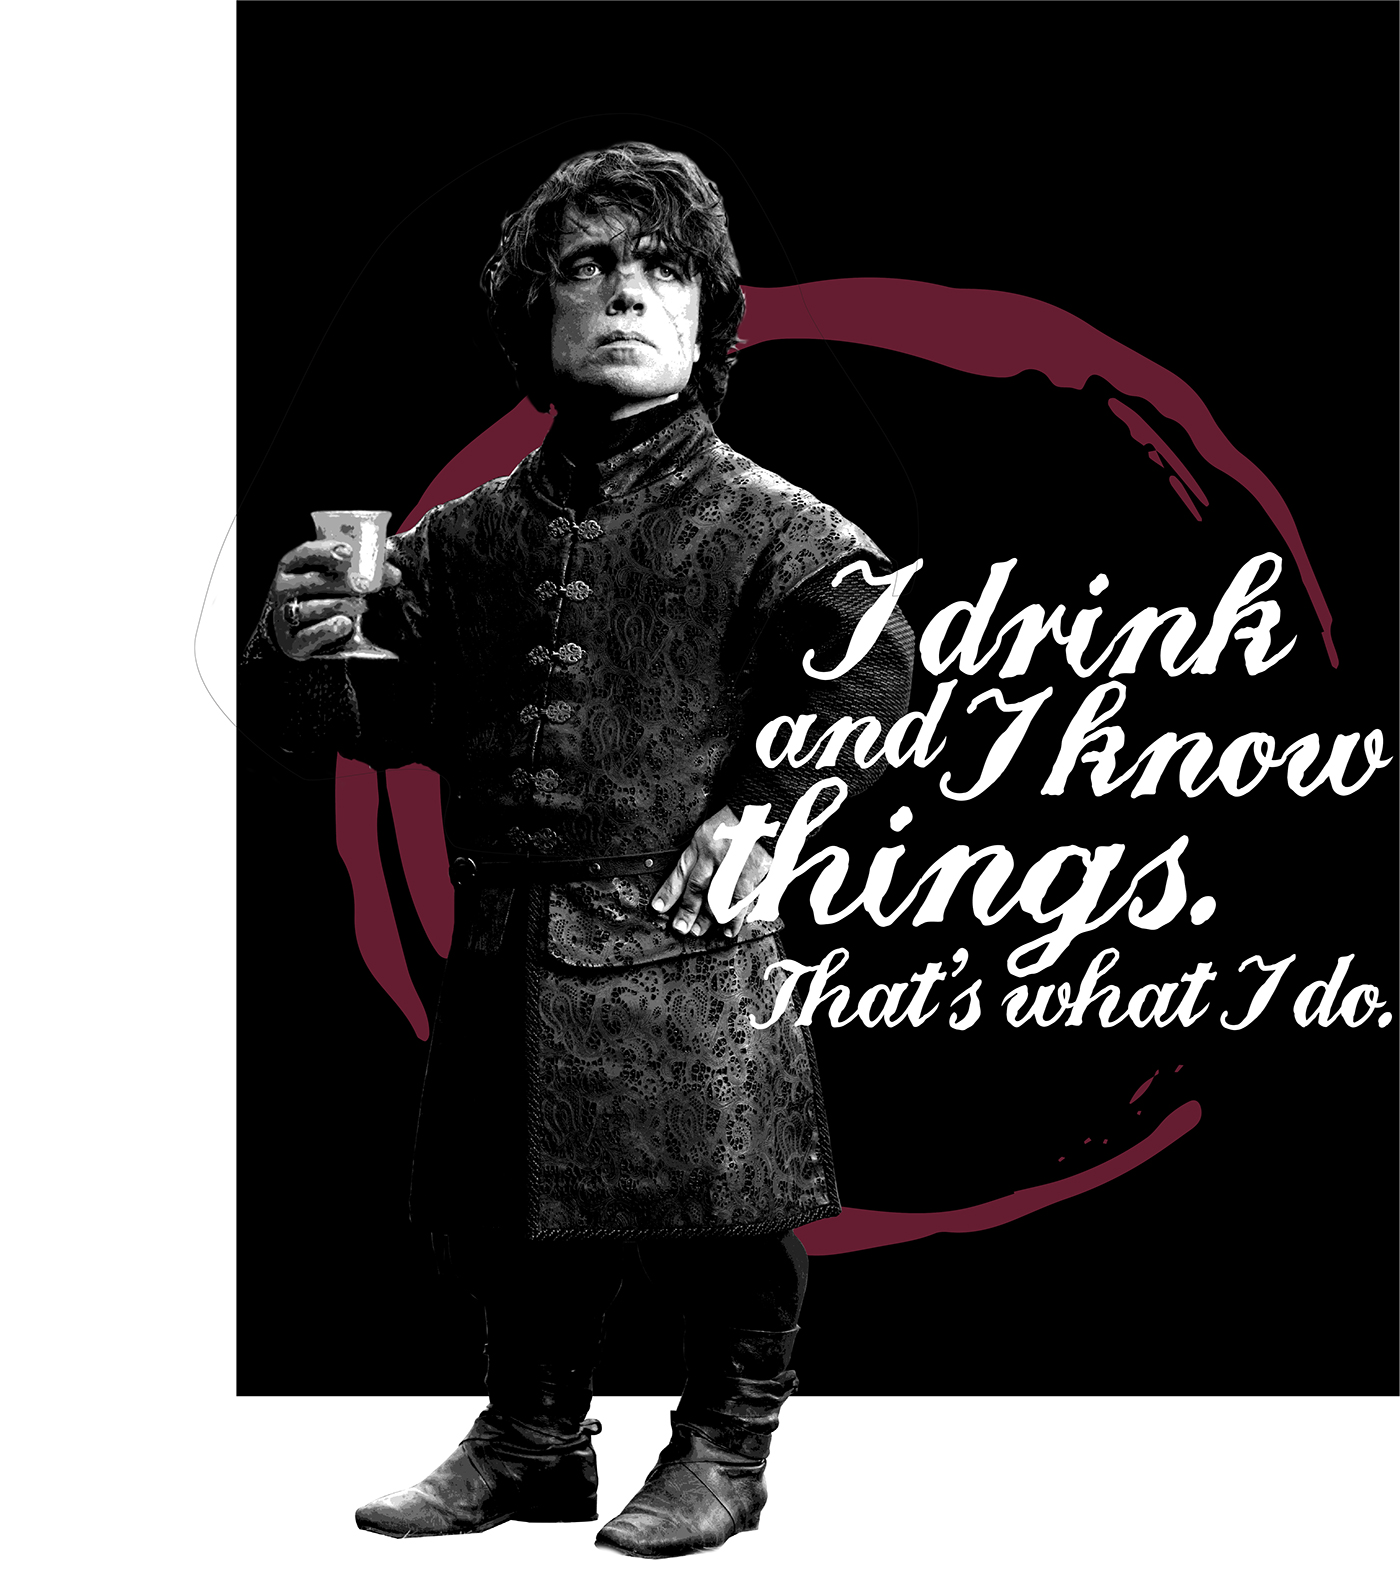 Game of Thrones tyrion lannister hbo design wine alcohol drinking